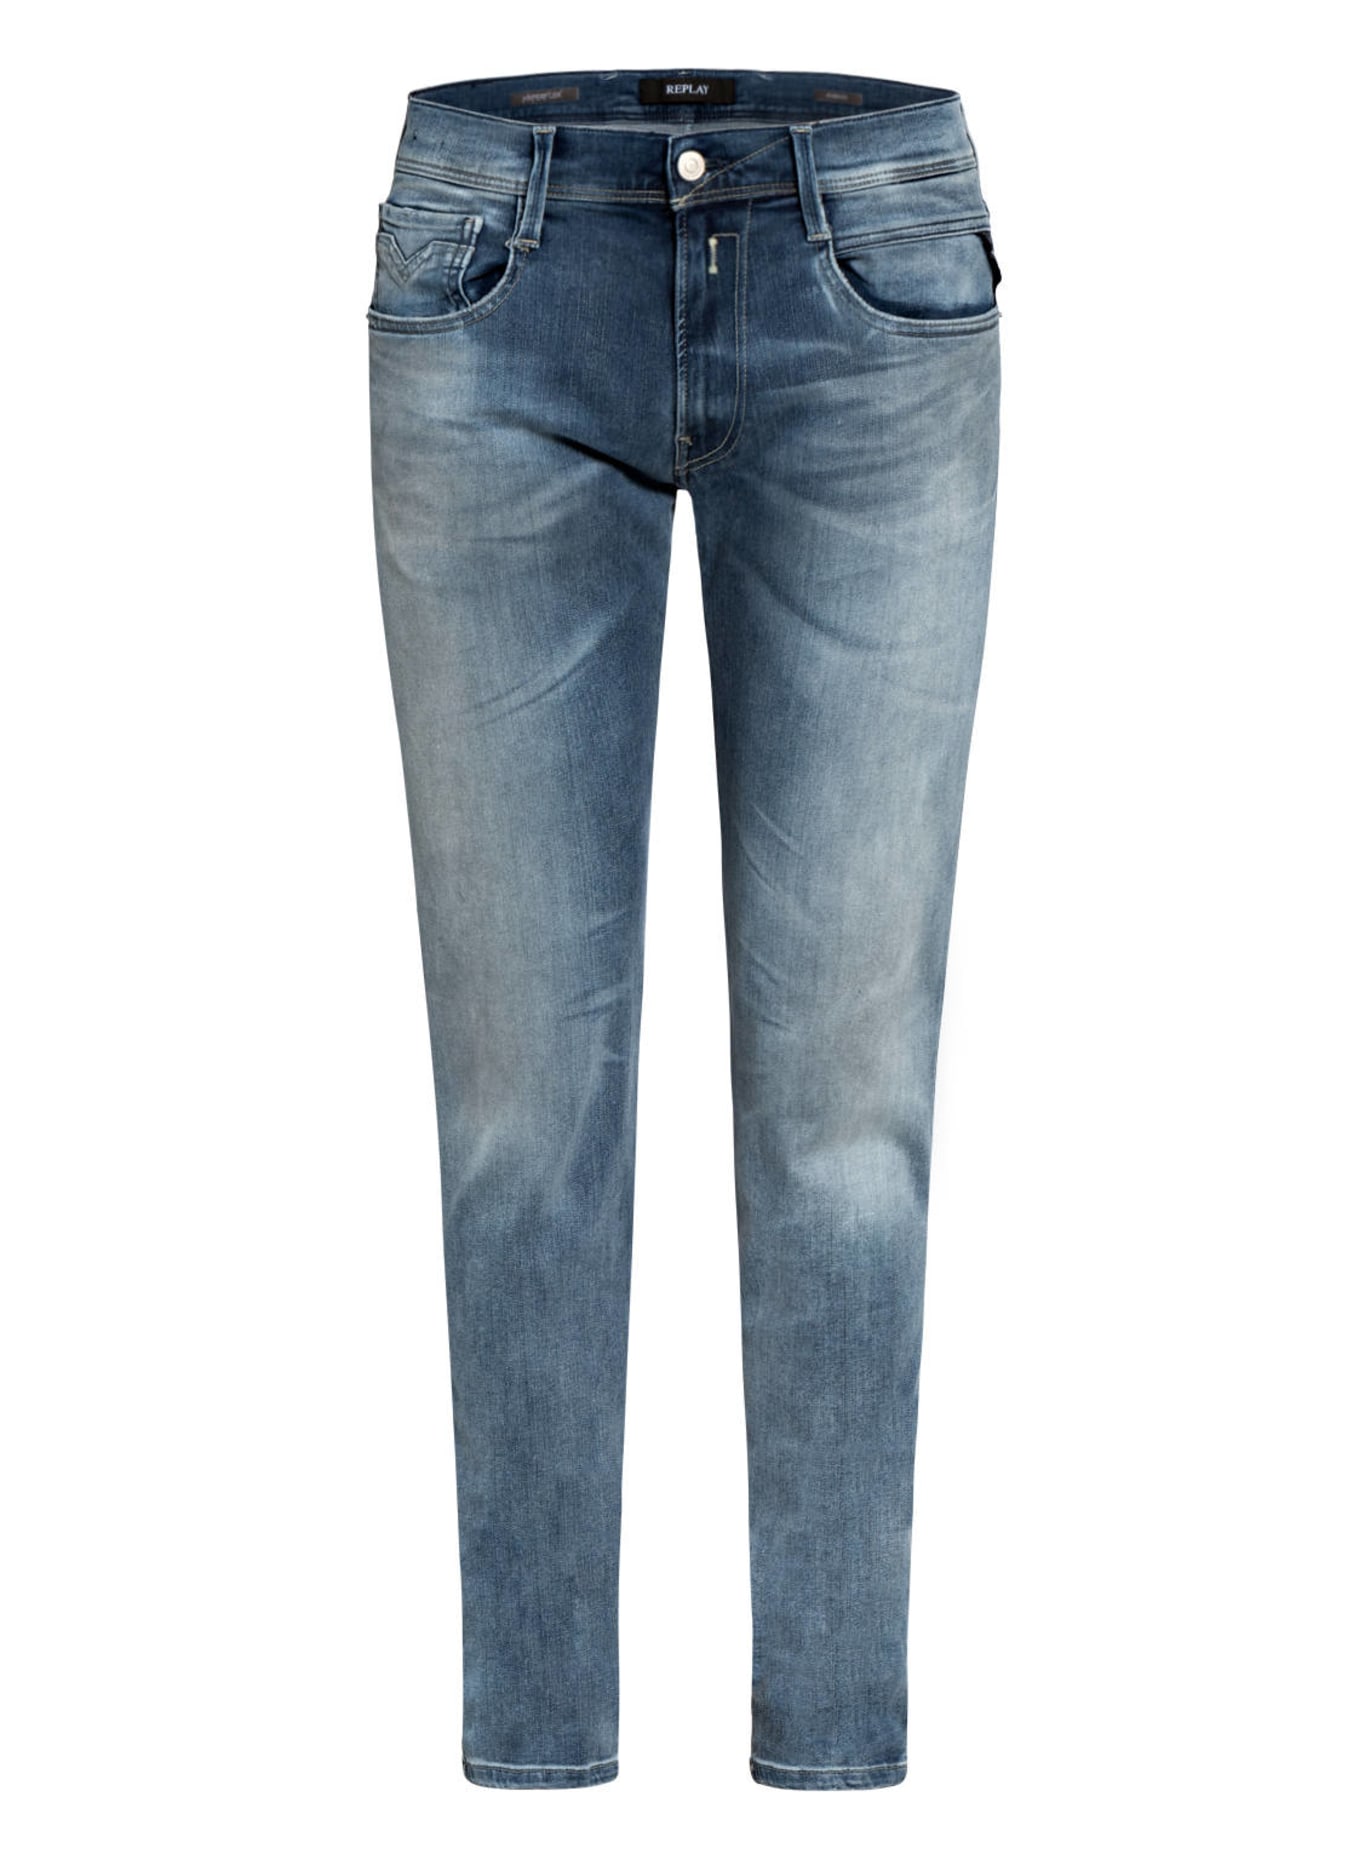 REPLAY Jeans ANBASS slim fit, Color: 009 MEDIUM BLUE (Image 1)